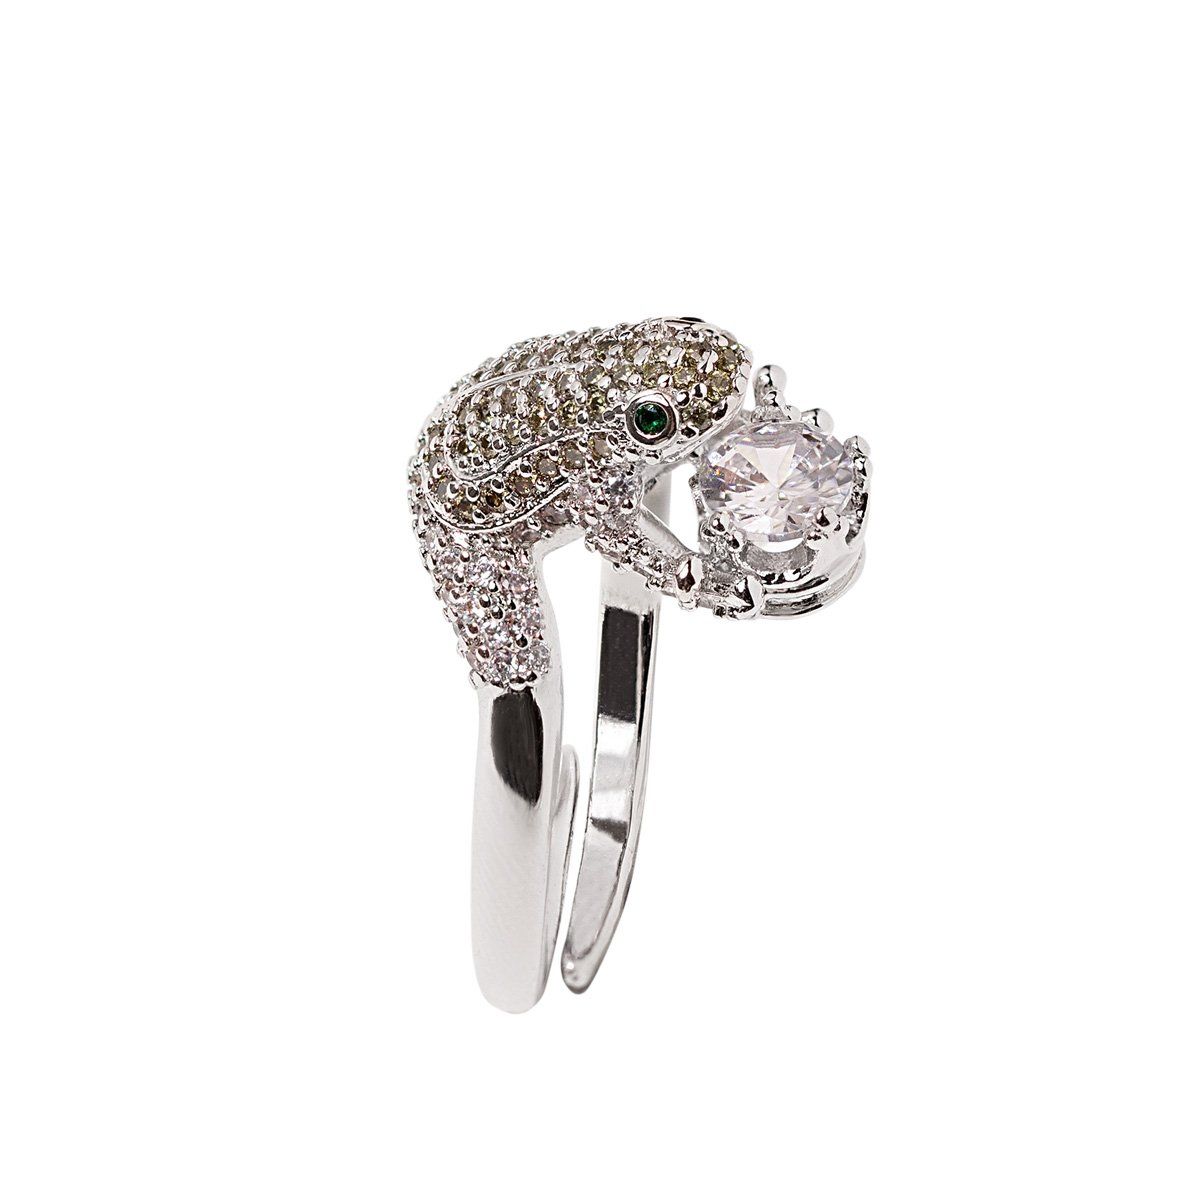 Frog Ring With Sparkling CZ Stones Vinty Jewelry